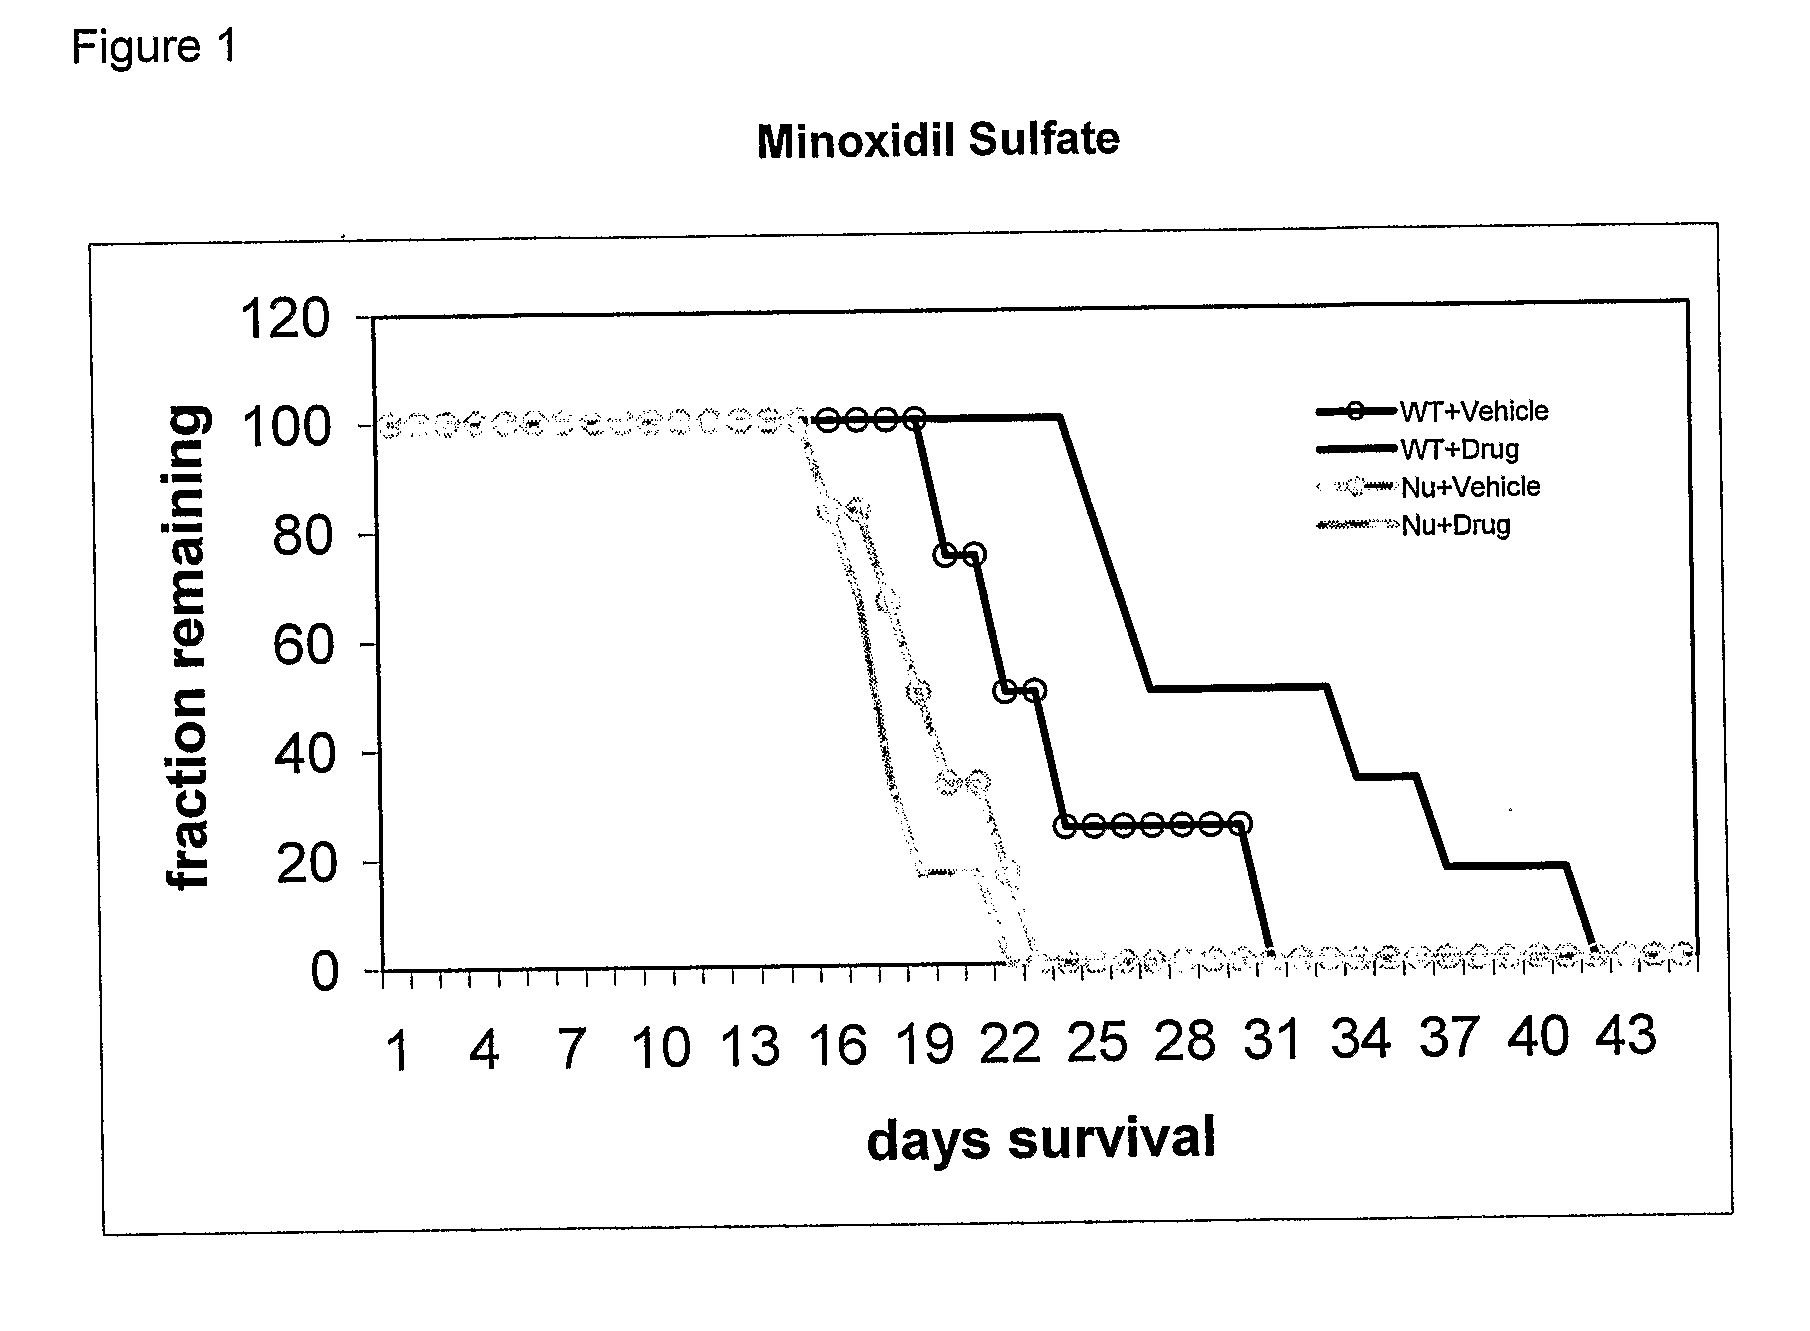 Use Of Minoxidil Sulfate As An Anti-Tumor Drug